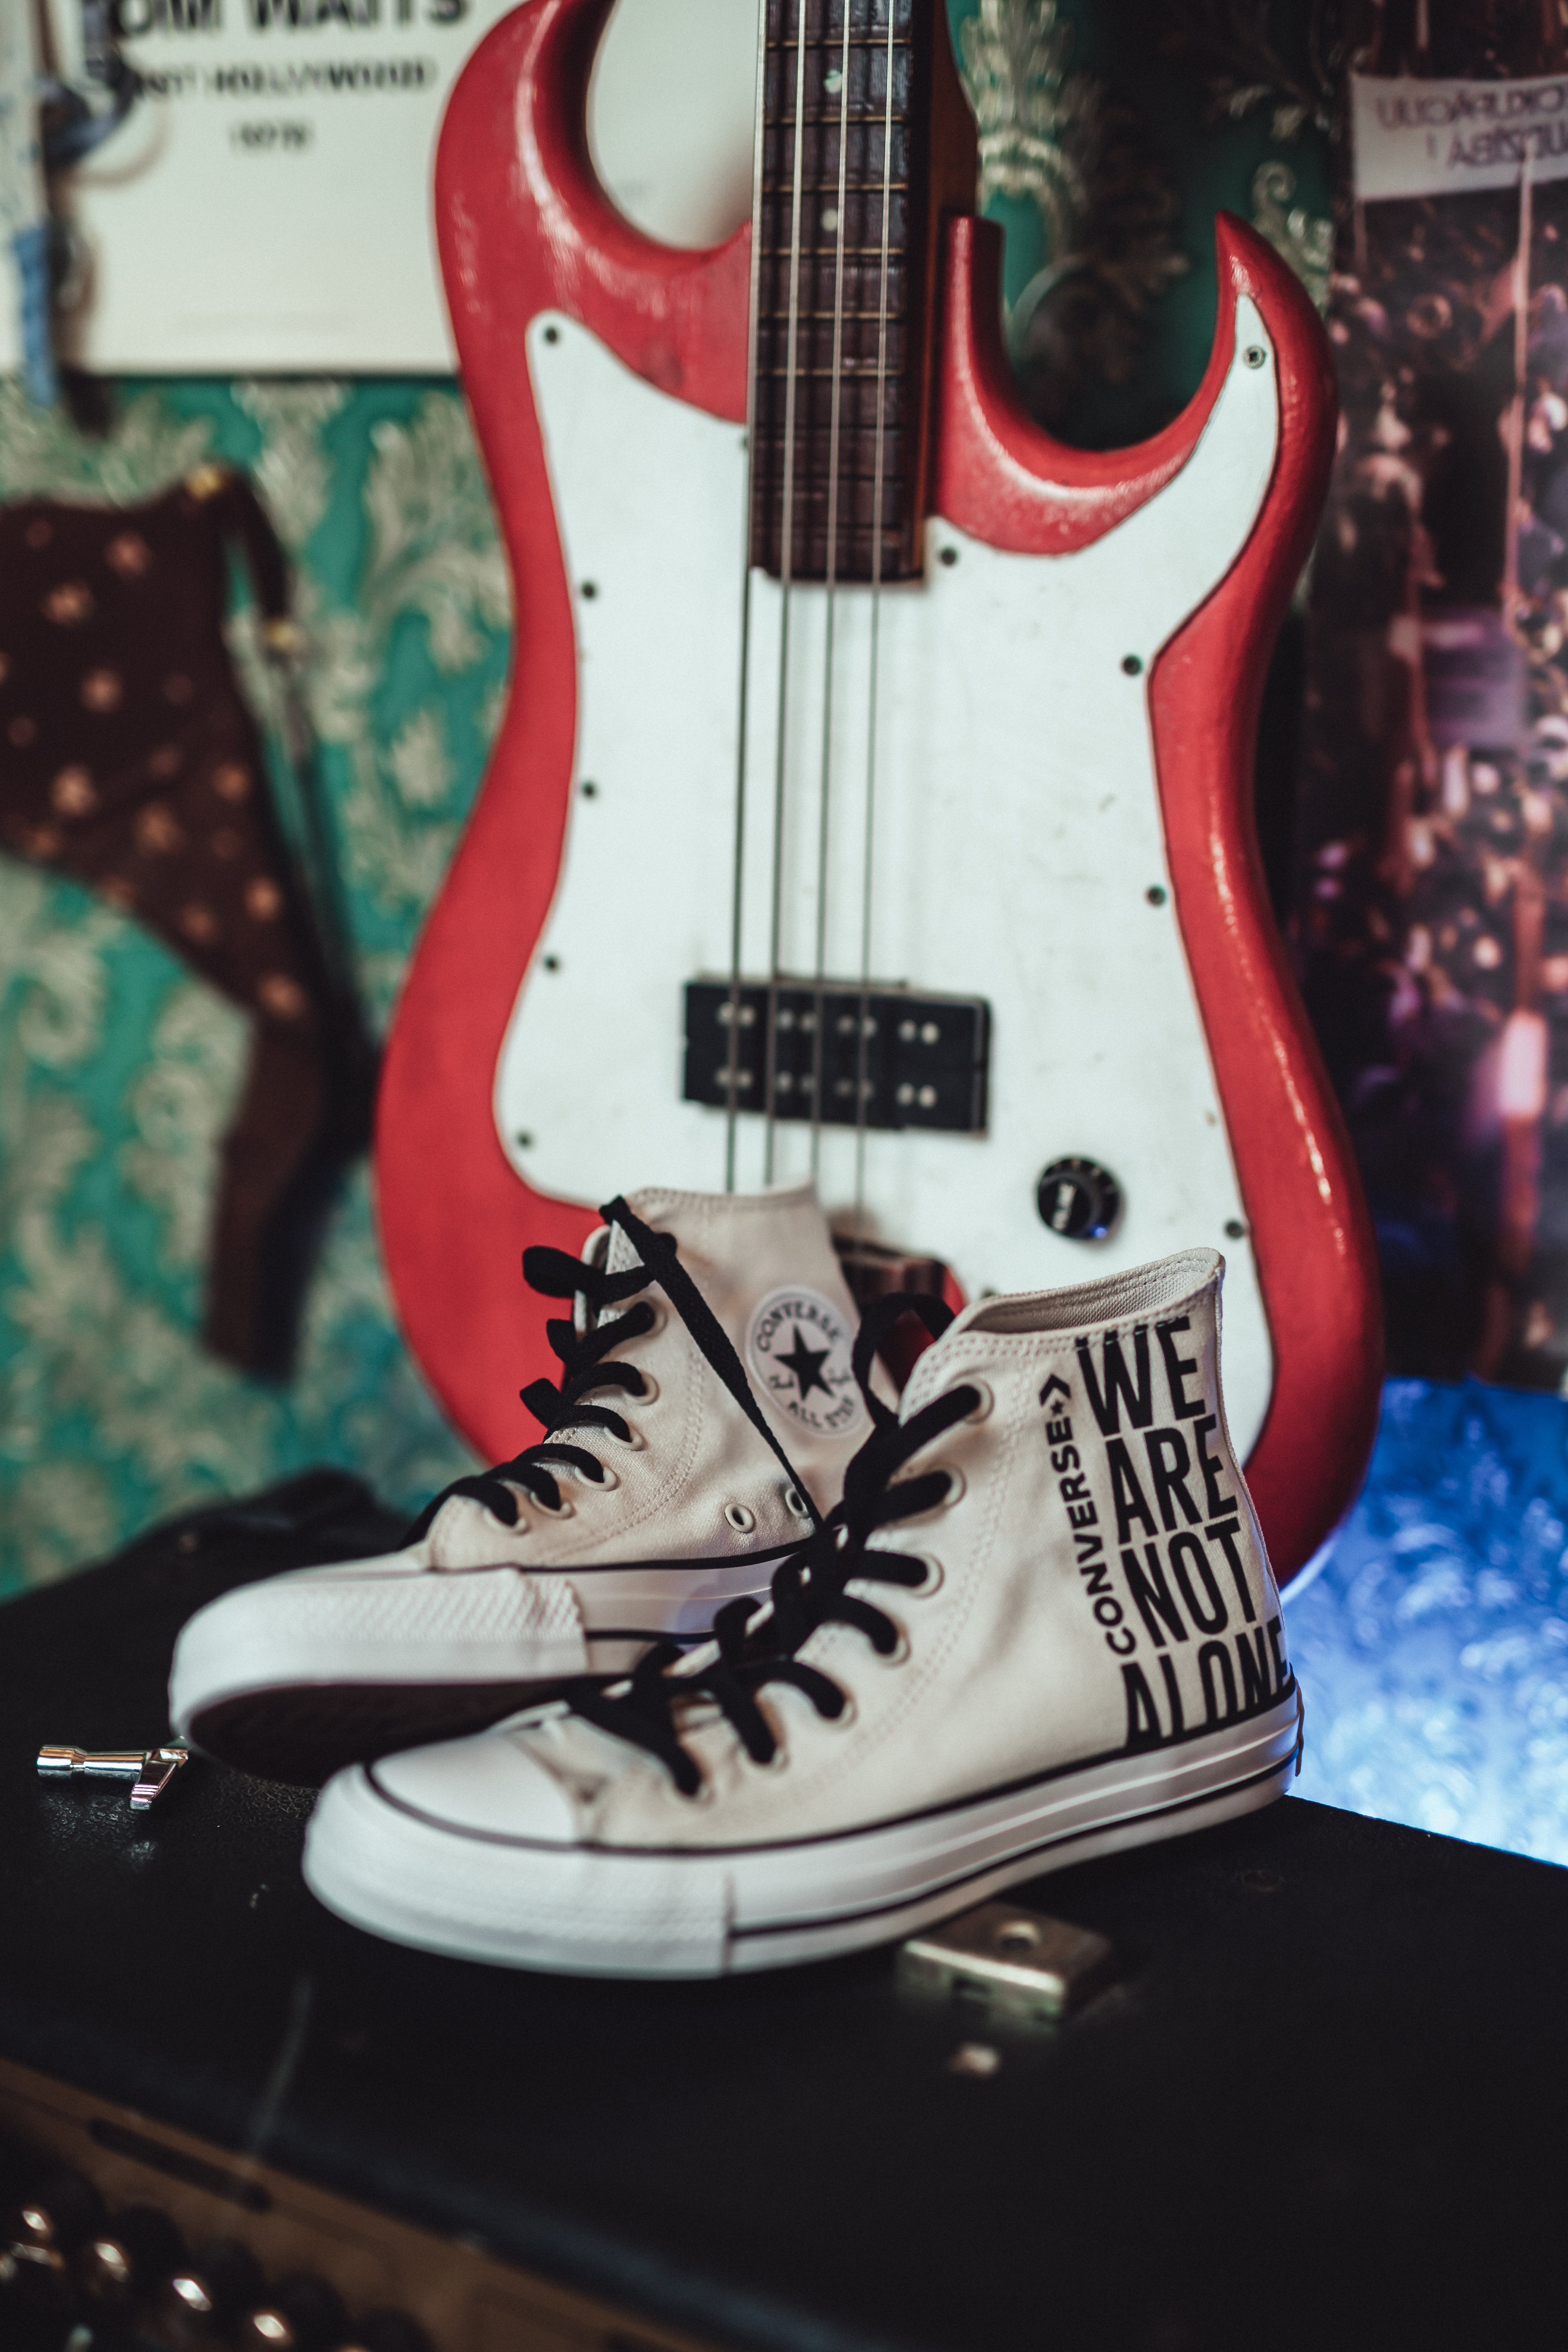 miscellanea, miscellaneous, sneakers, guitar, style, shoes, footwear